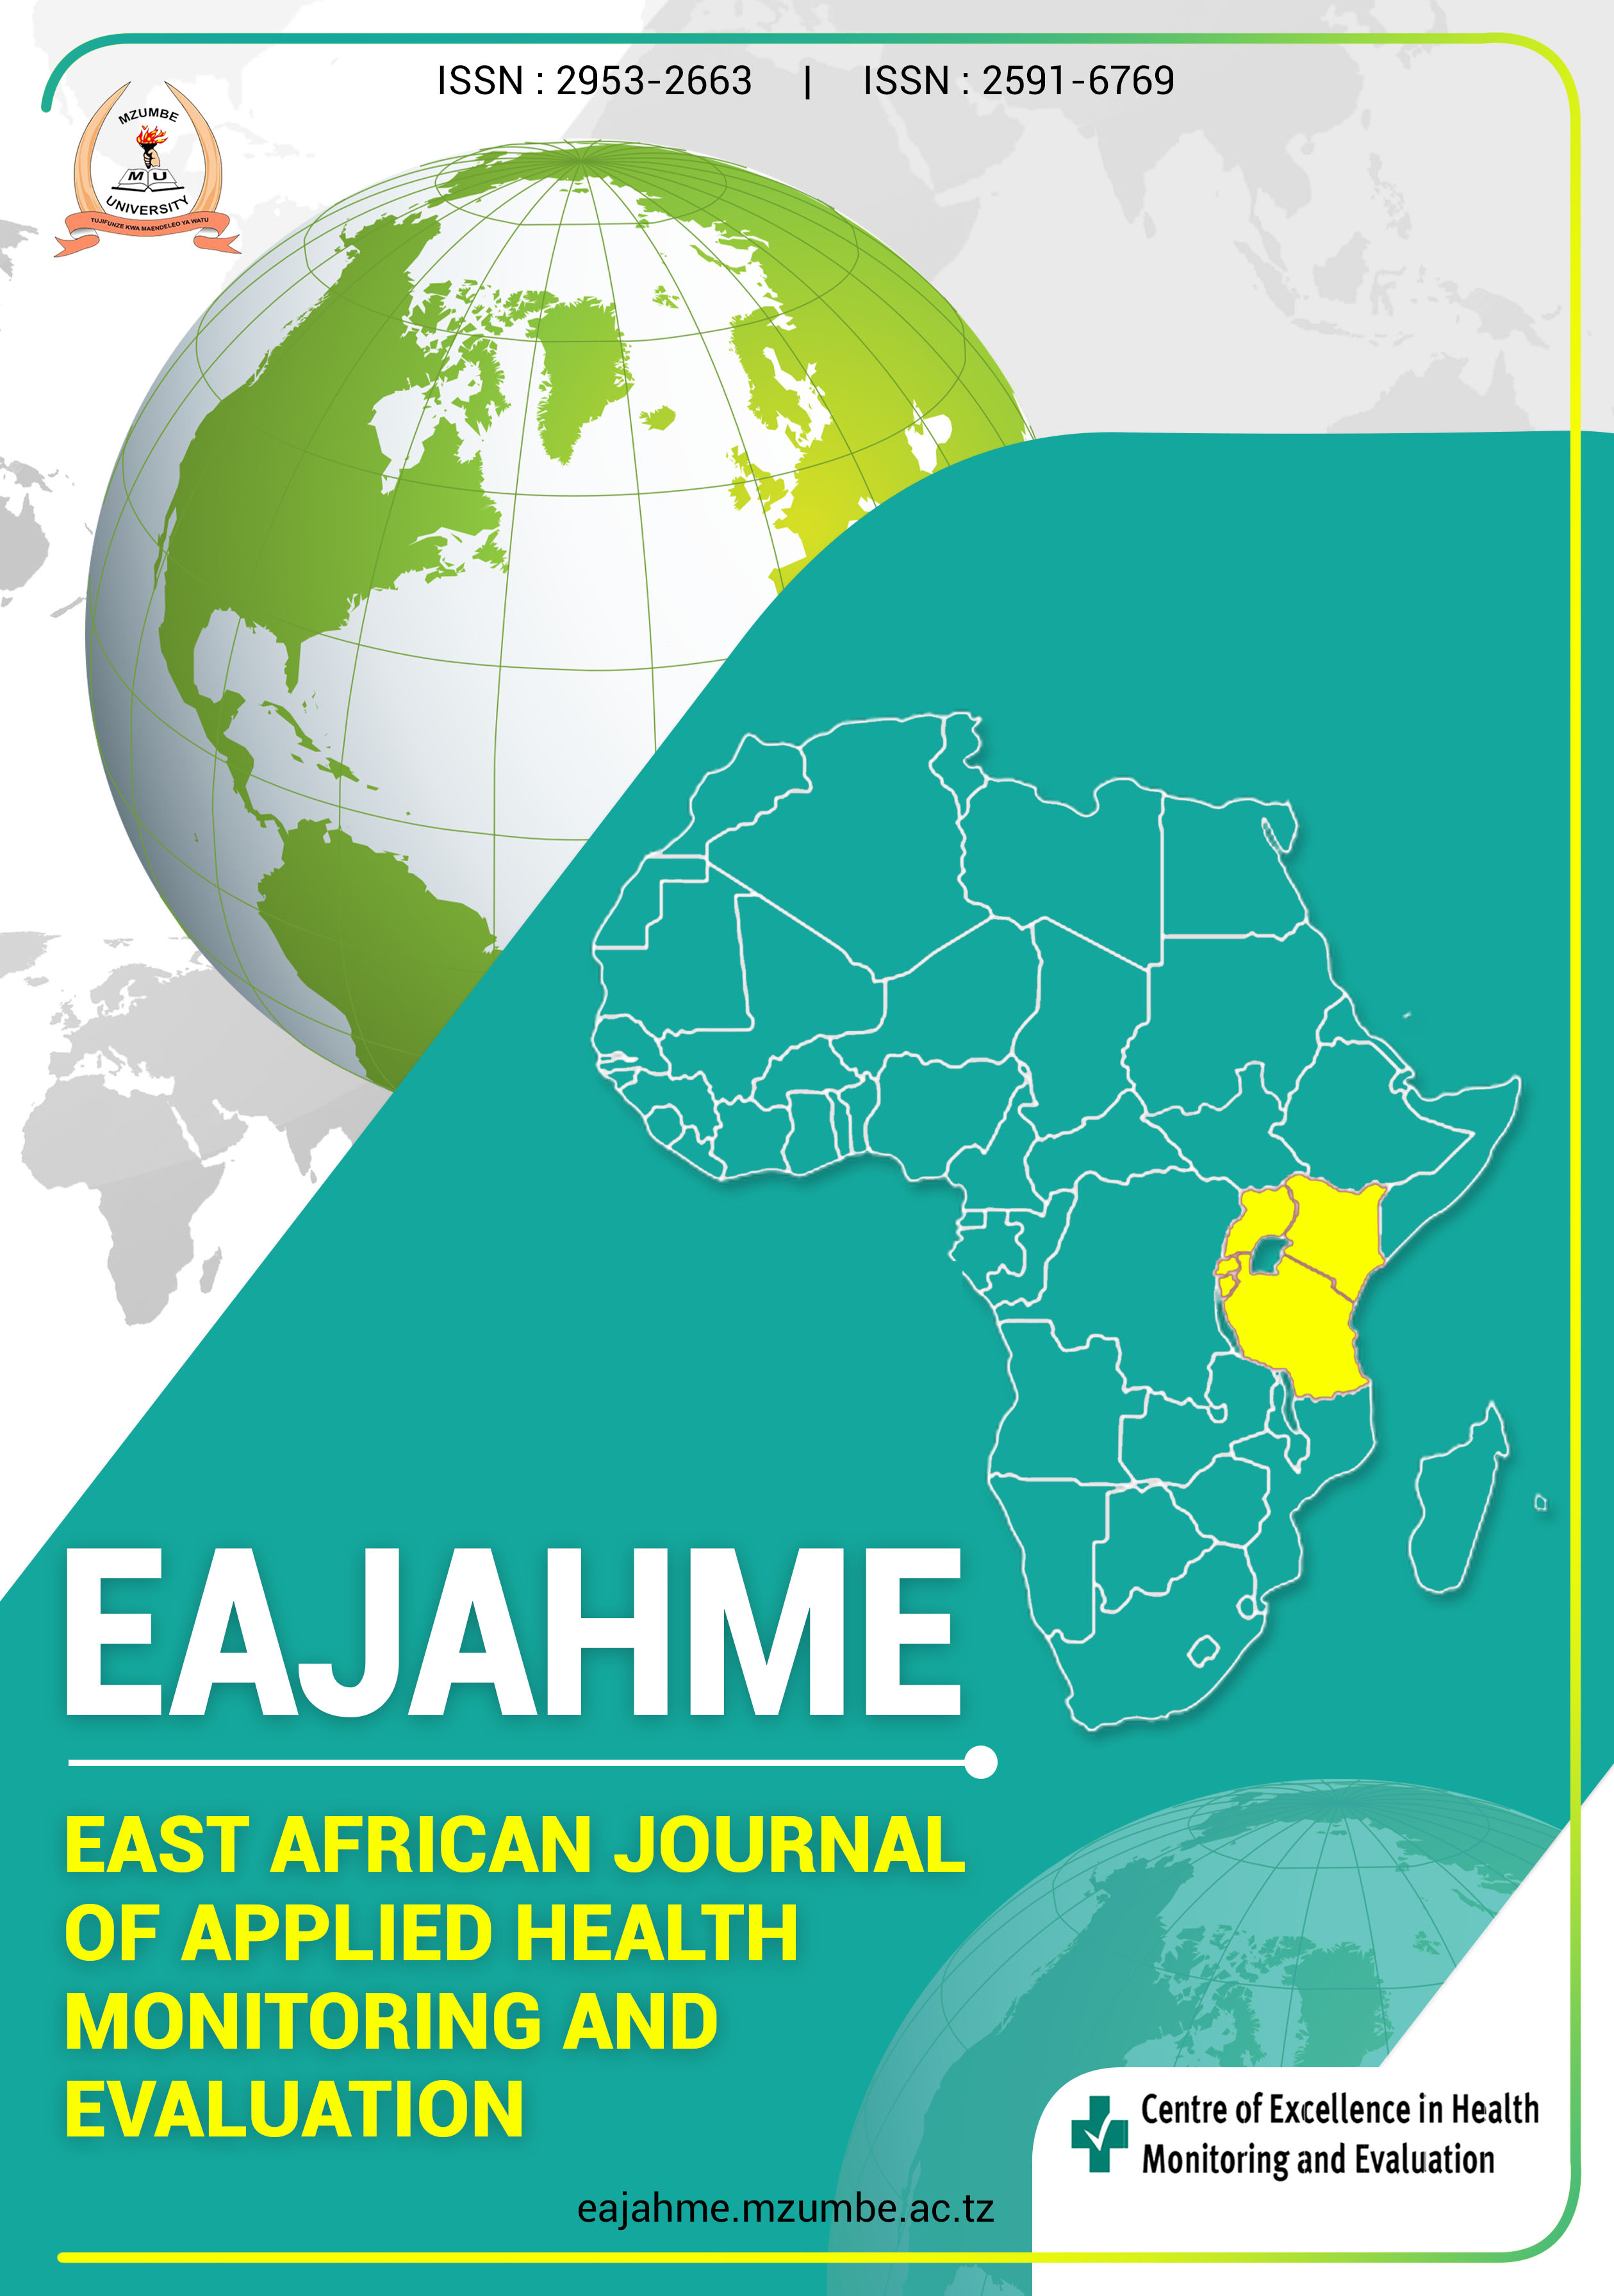 East African Journal of Applied Health Monitoring and Evaluation 